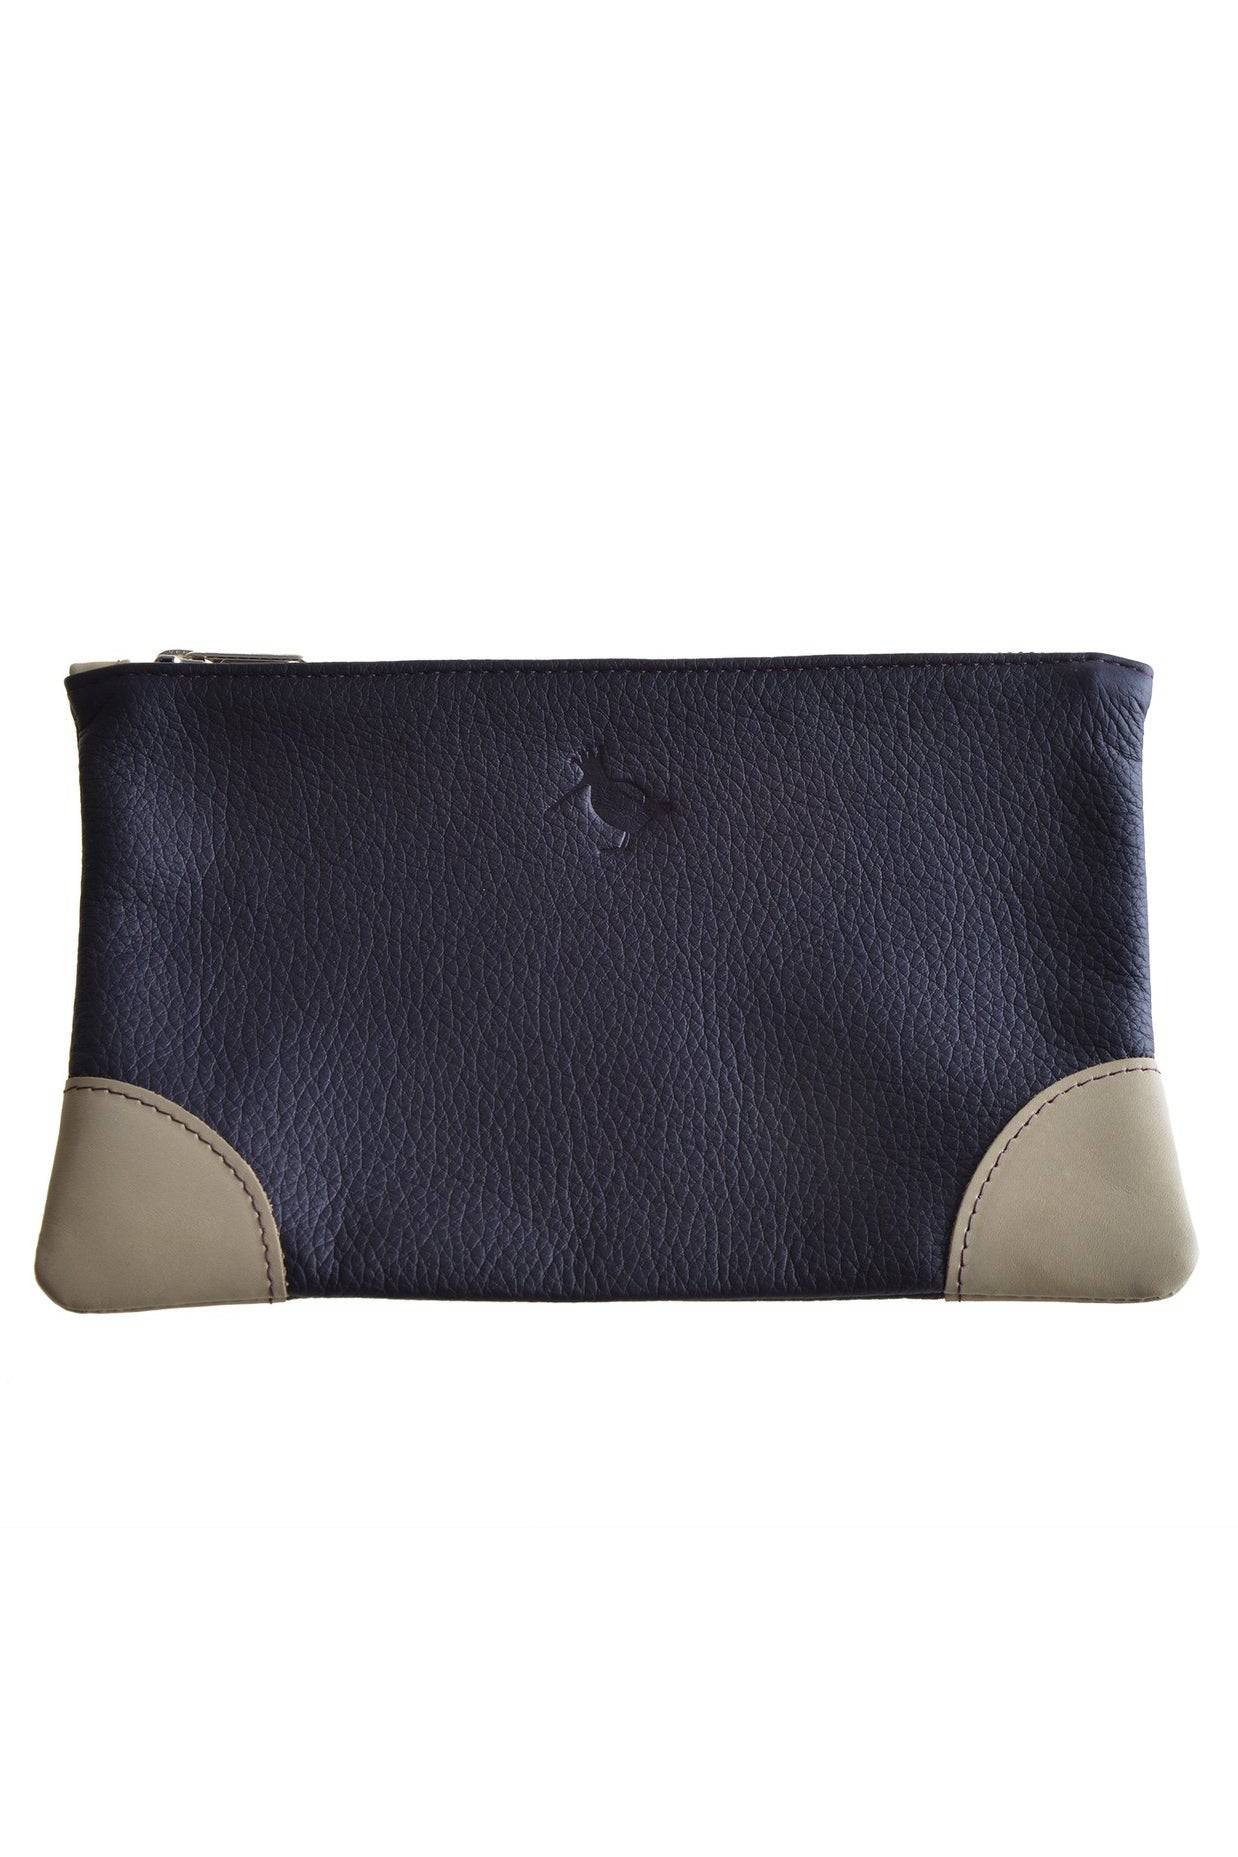 Navy Blue Leather Pouch with Grey Corners by Woodcock & Cavendish for sale - Woodcock and Cavendish